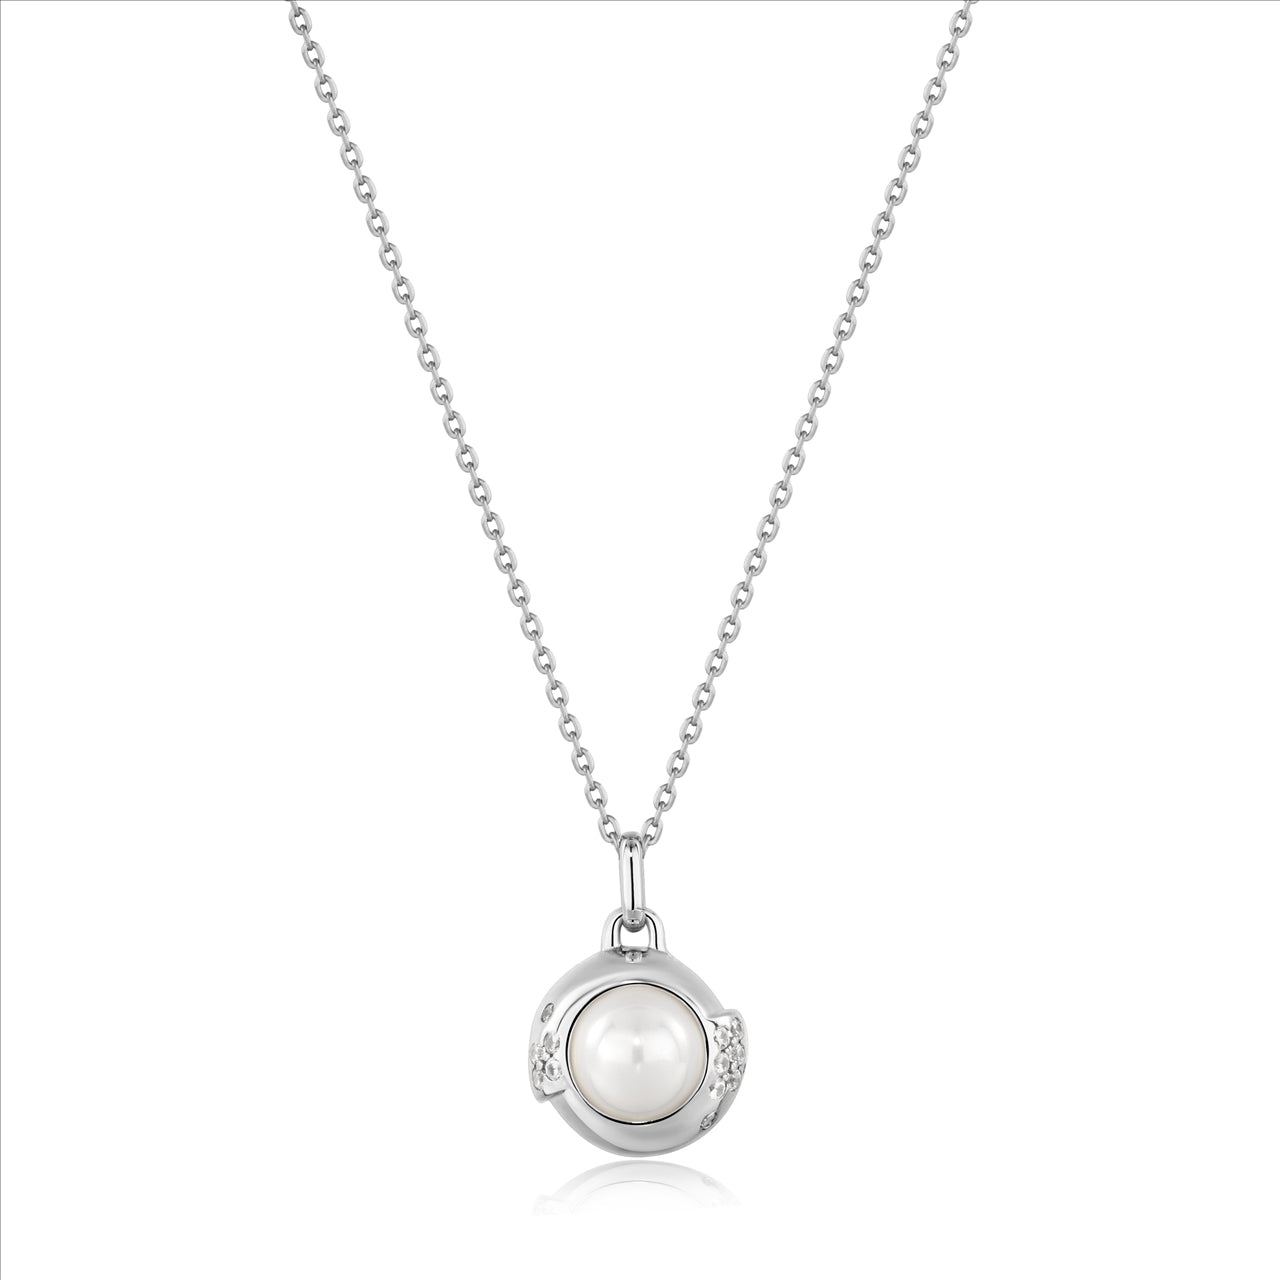 Ania Haie Modern Muse Pearl Necklace